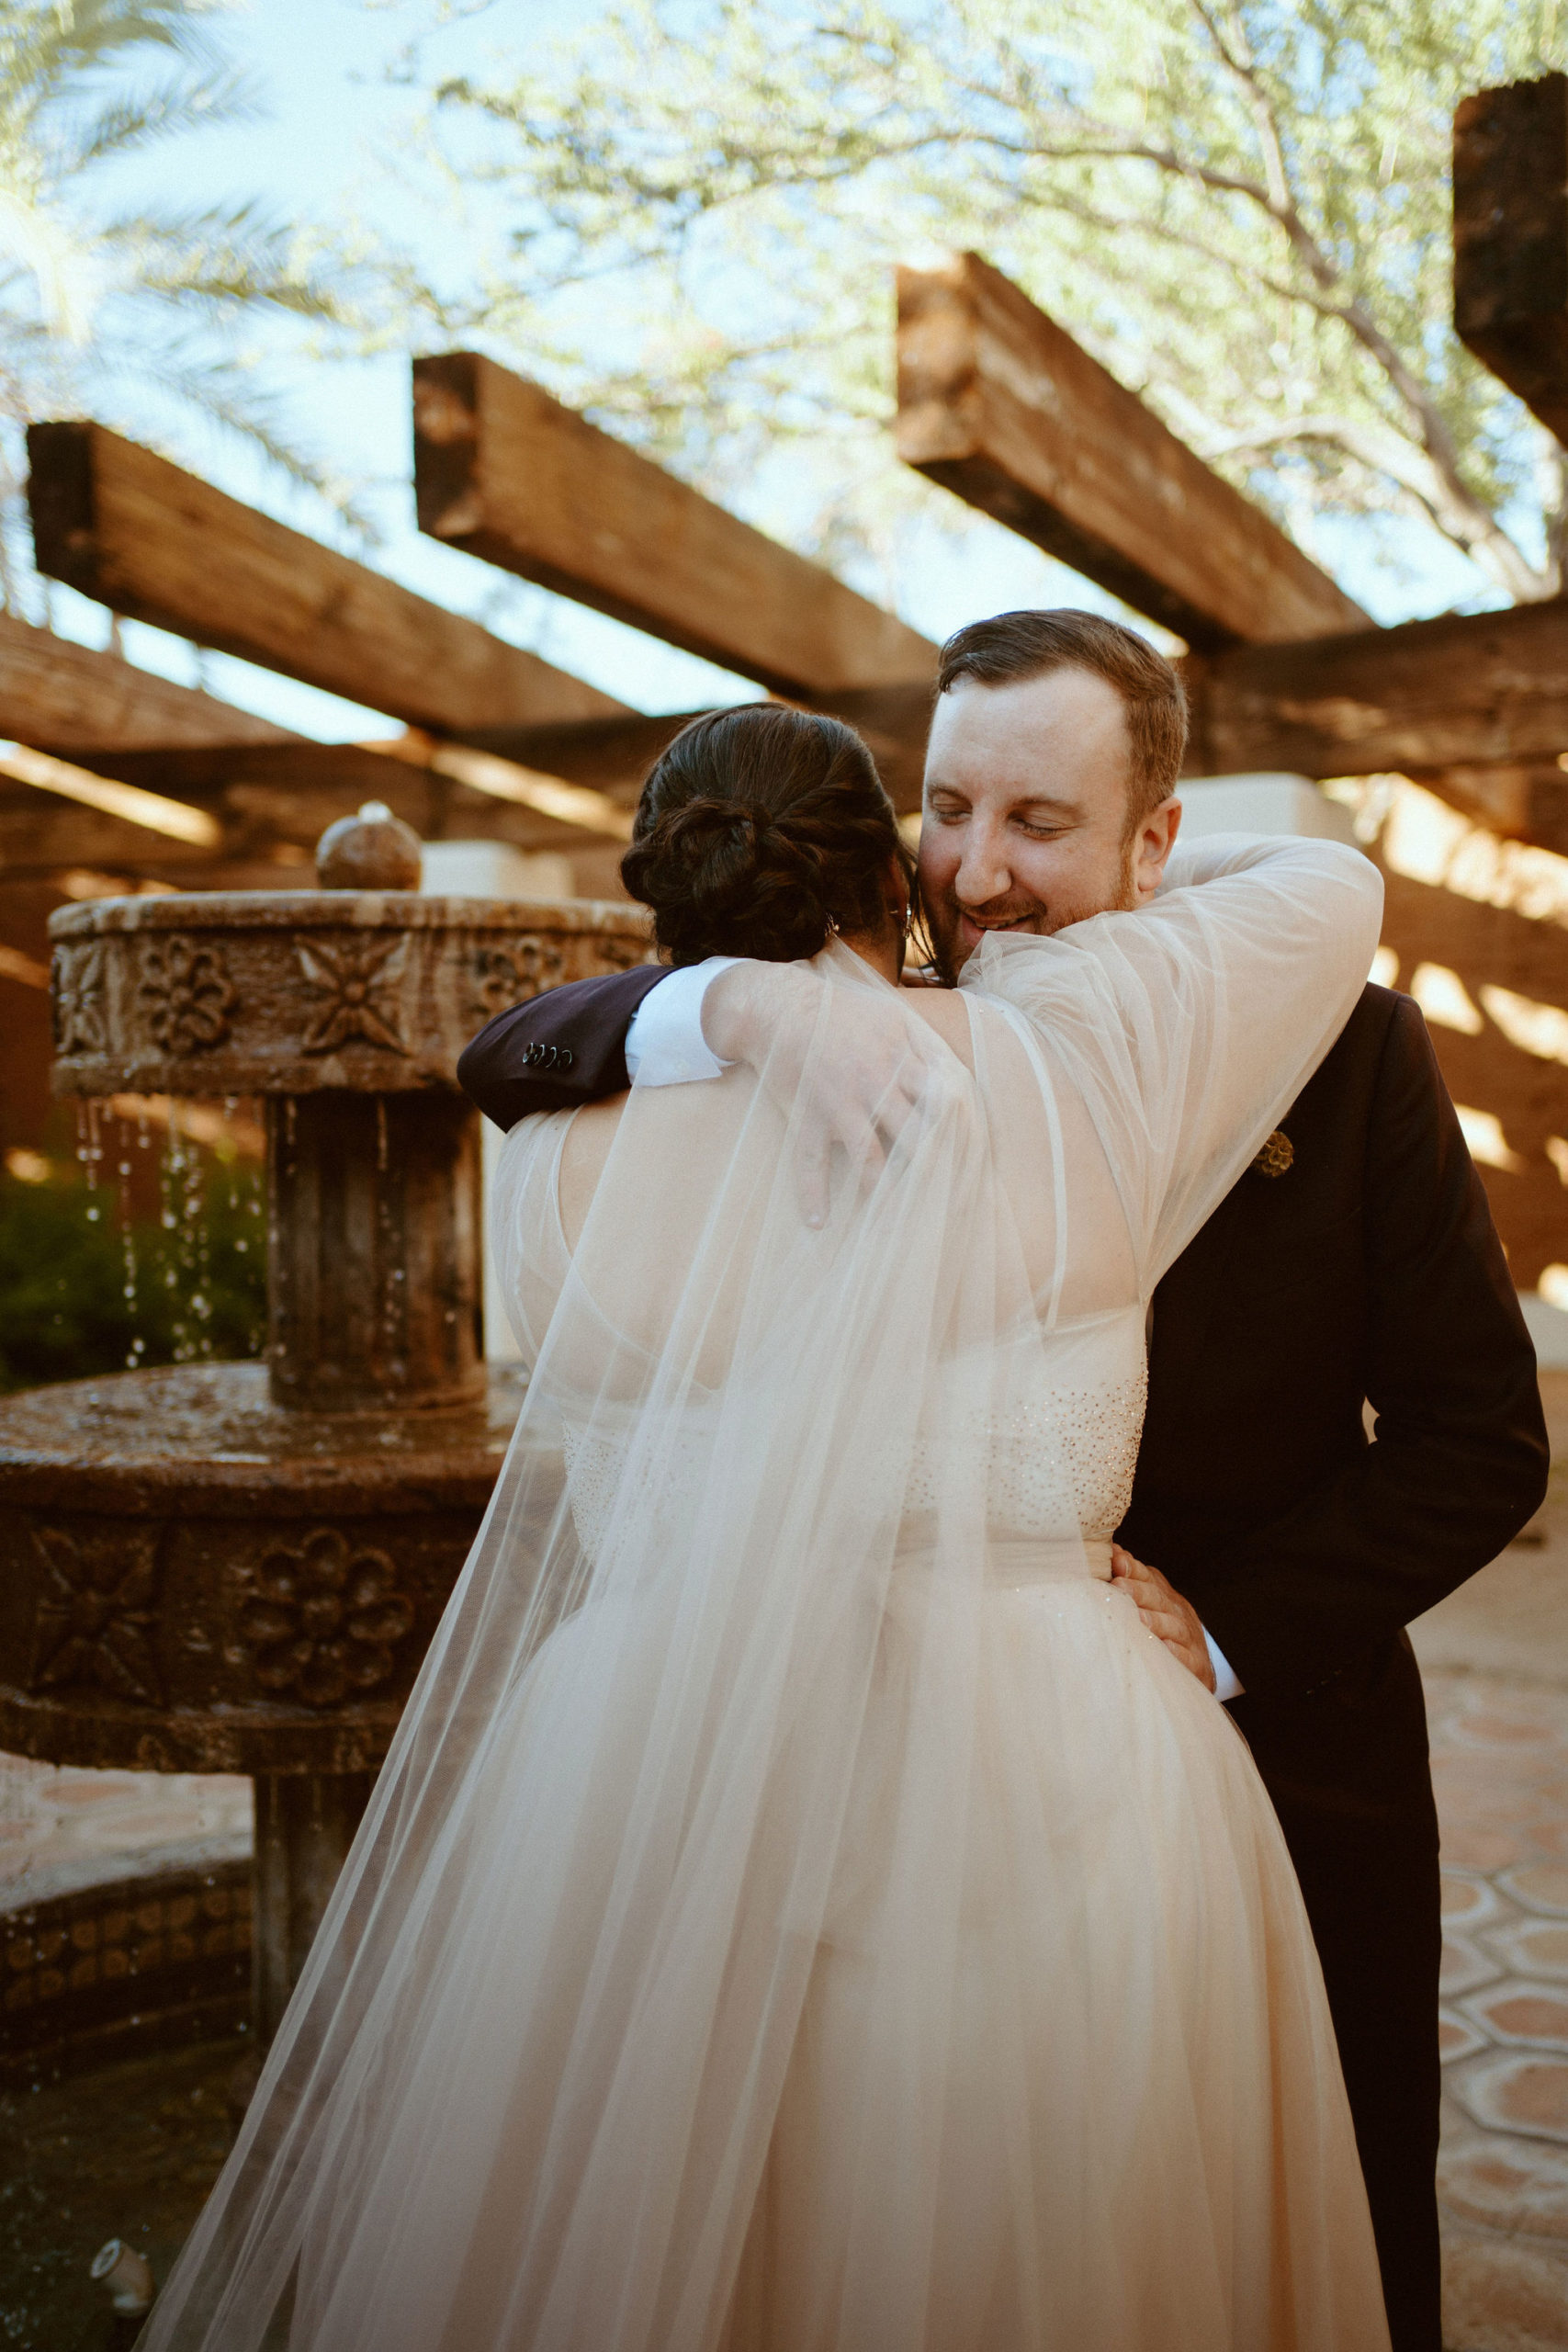 Saguaro National Park Micro-Wedding. The bride and groom hug as they see each other for the first time 